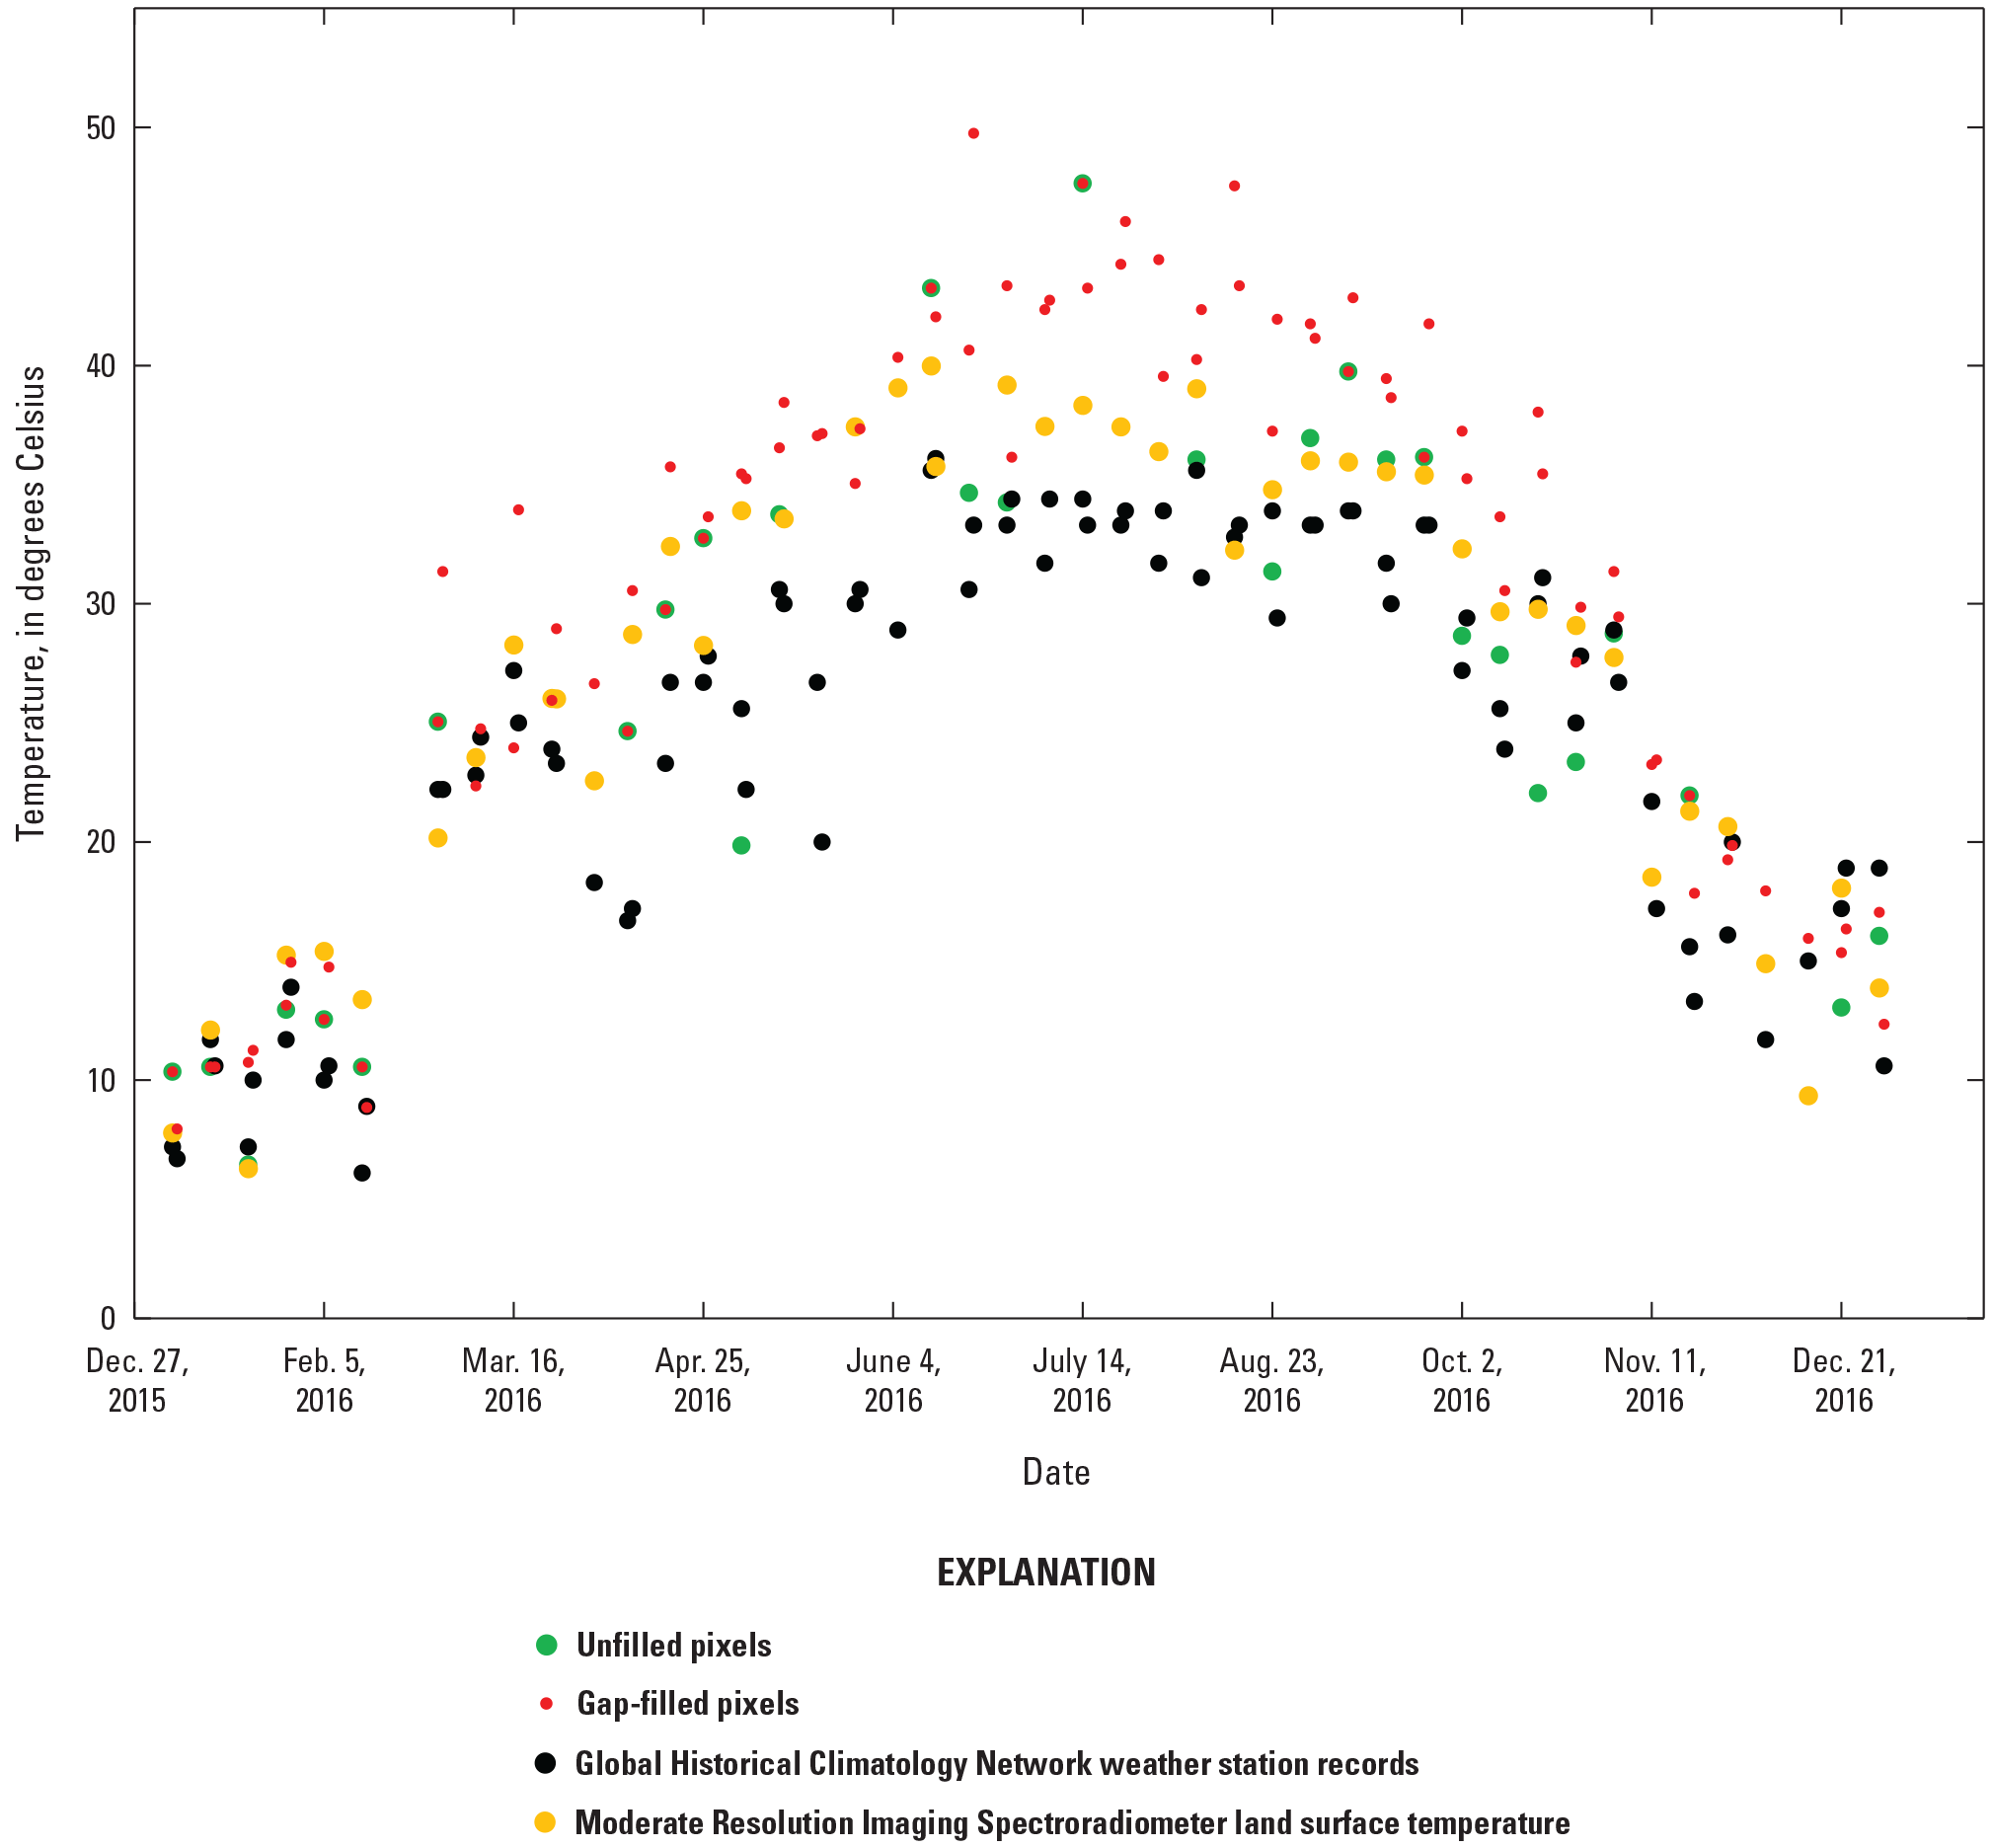 Temperatures from Landsat with and without gap filling, Moderate Resolution Imaging
                        Spectroradiometer, and climate record.